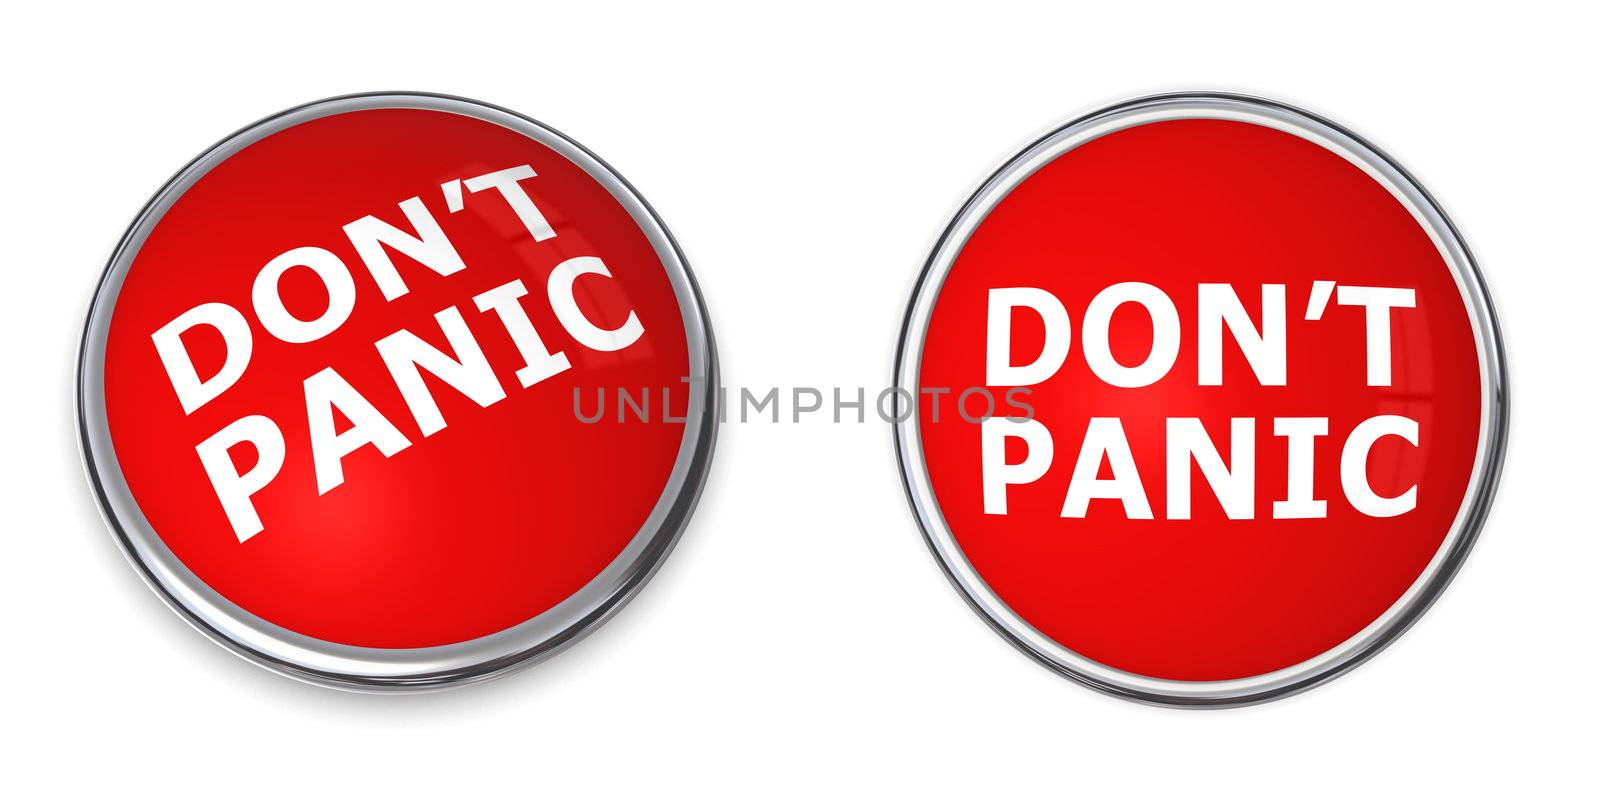 red rendered 3d button with white word don't panic